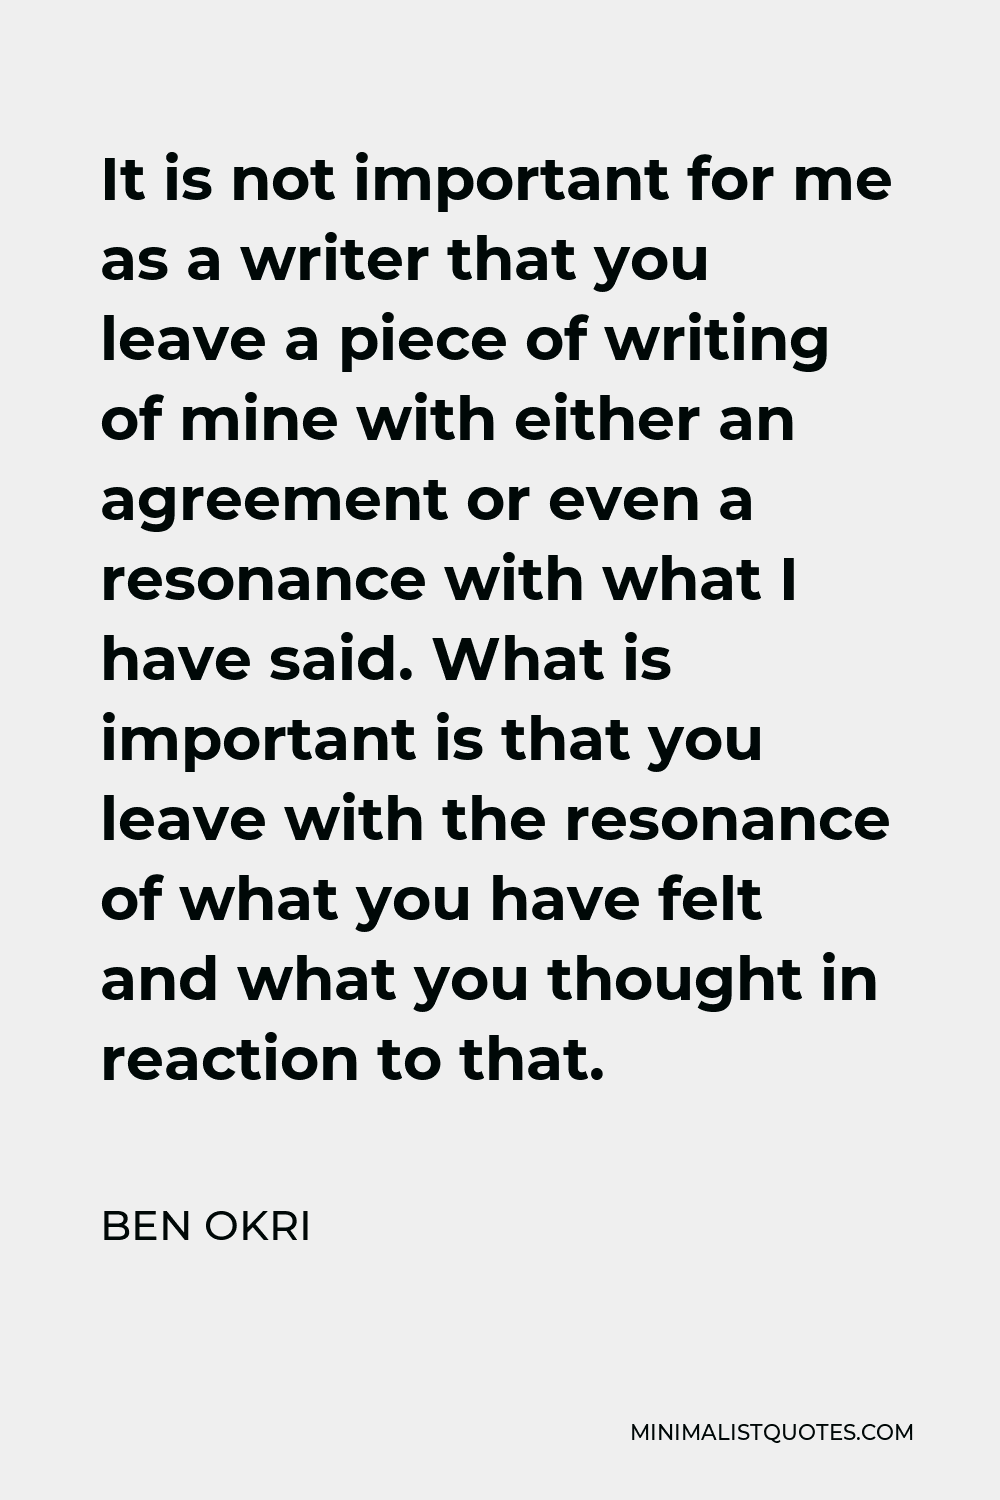 Ben Okri Quote - It is not important for me as a writer that you leave a piece of writing of mine with either an agreement or even a resonance with what I have said. What is important is that you leave with the resonance of what you have felt and what you thought in reaction to that.